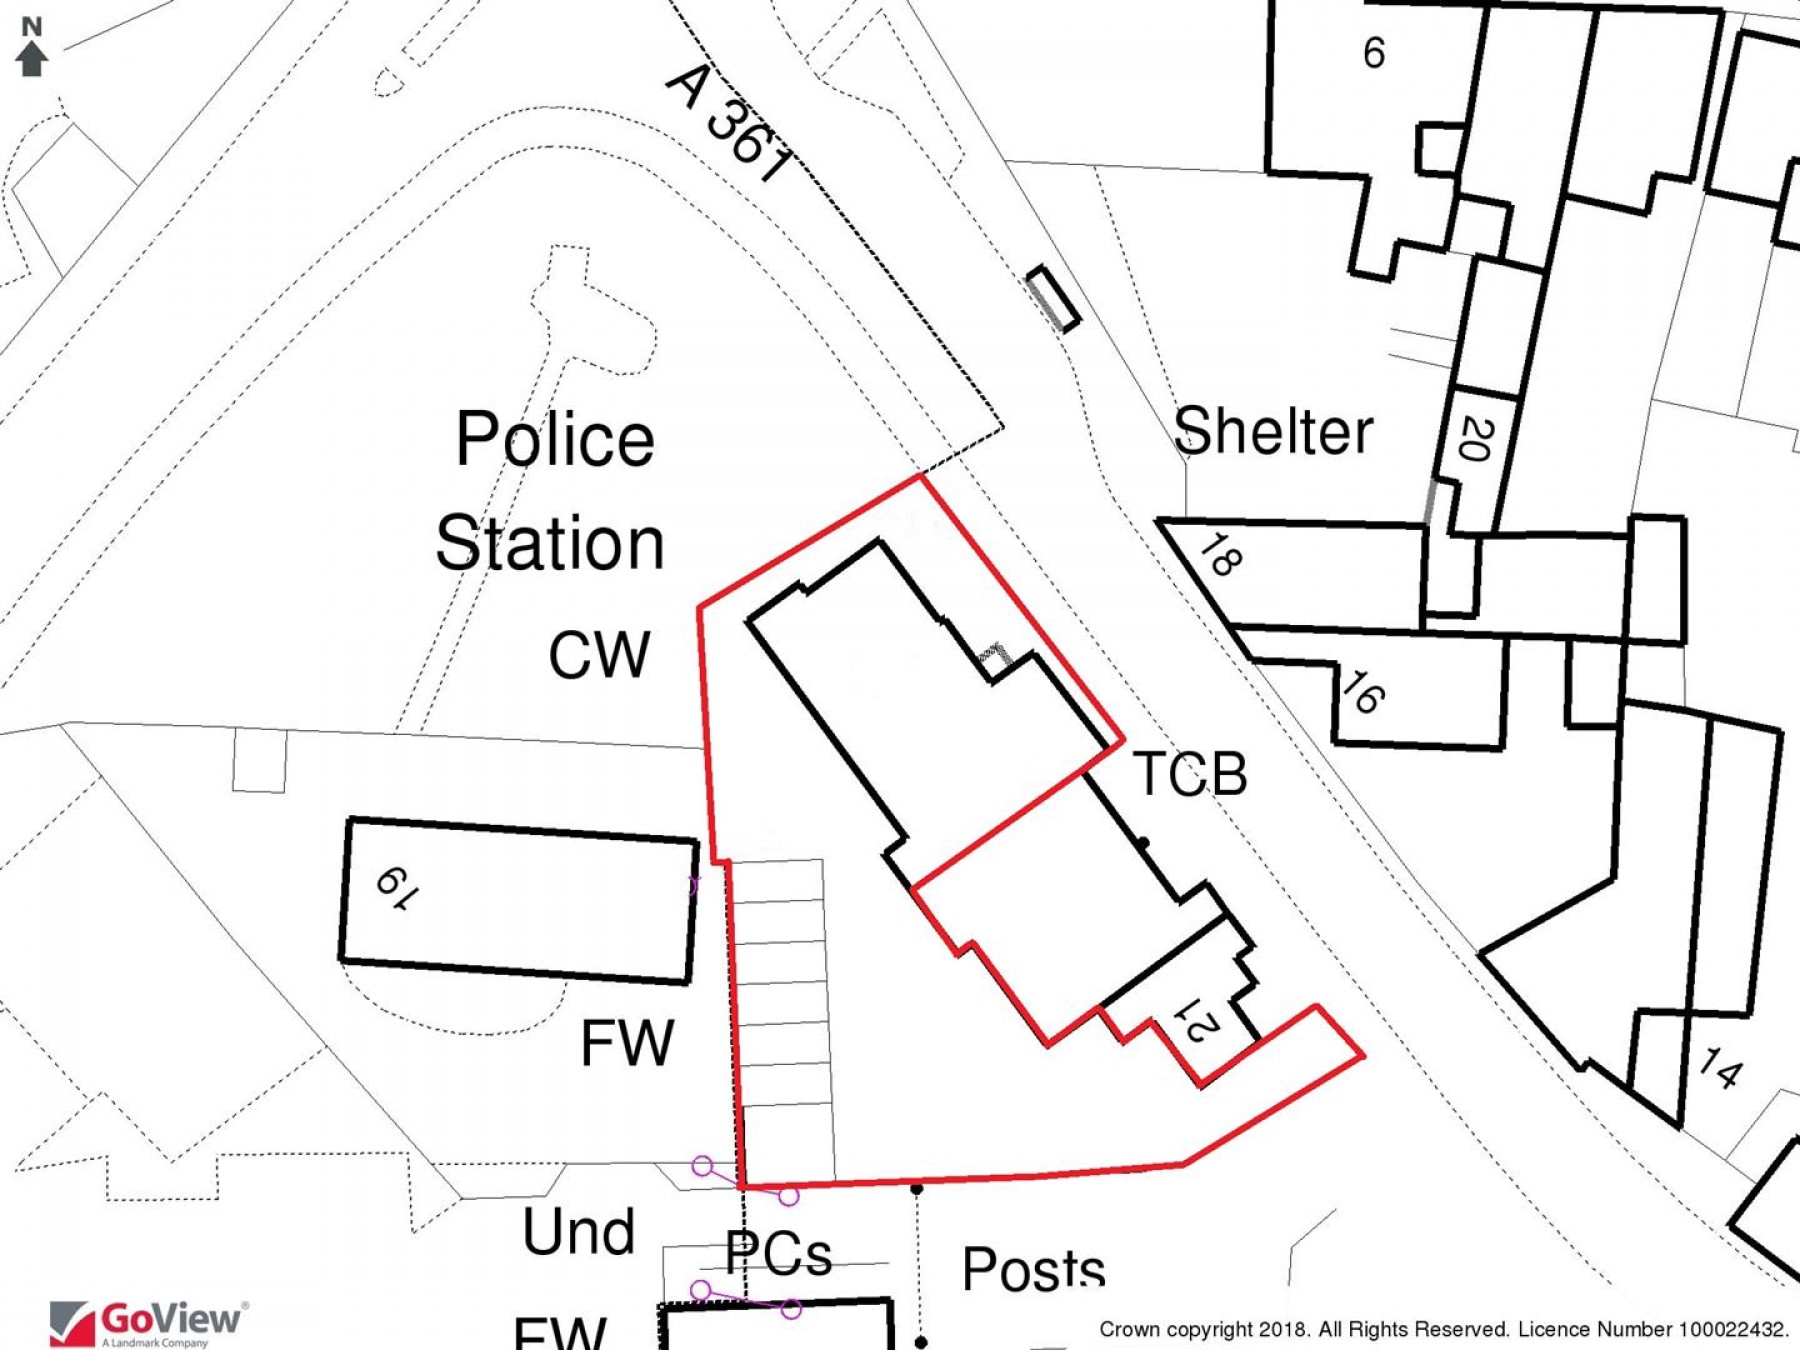 Images for POLICE STATION - DEVELOPMENT POTENTIAL